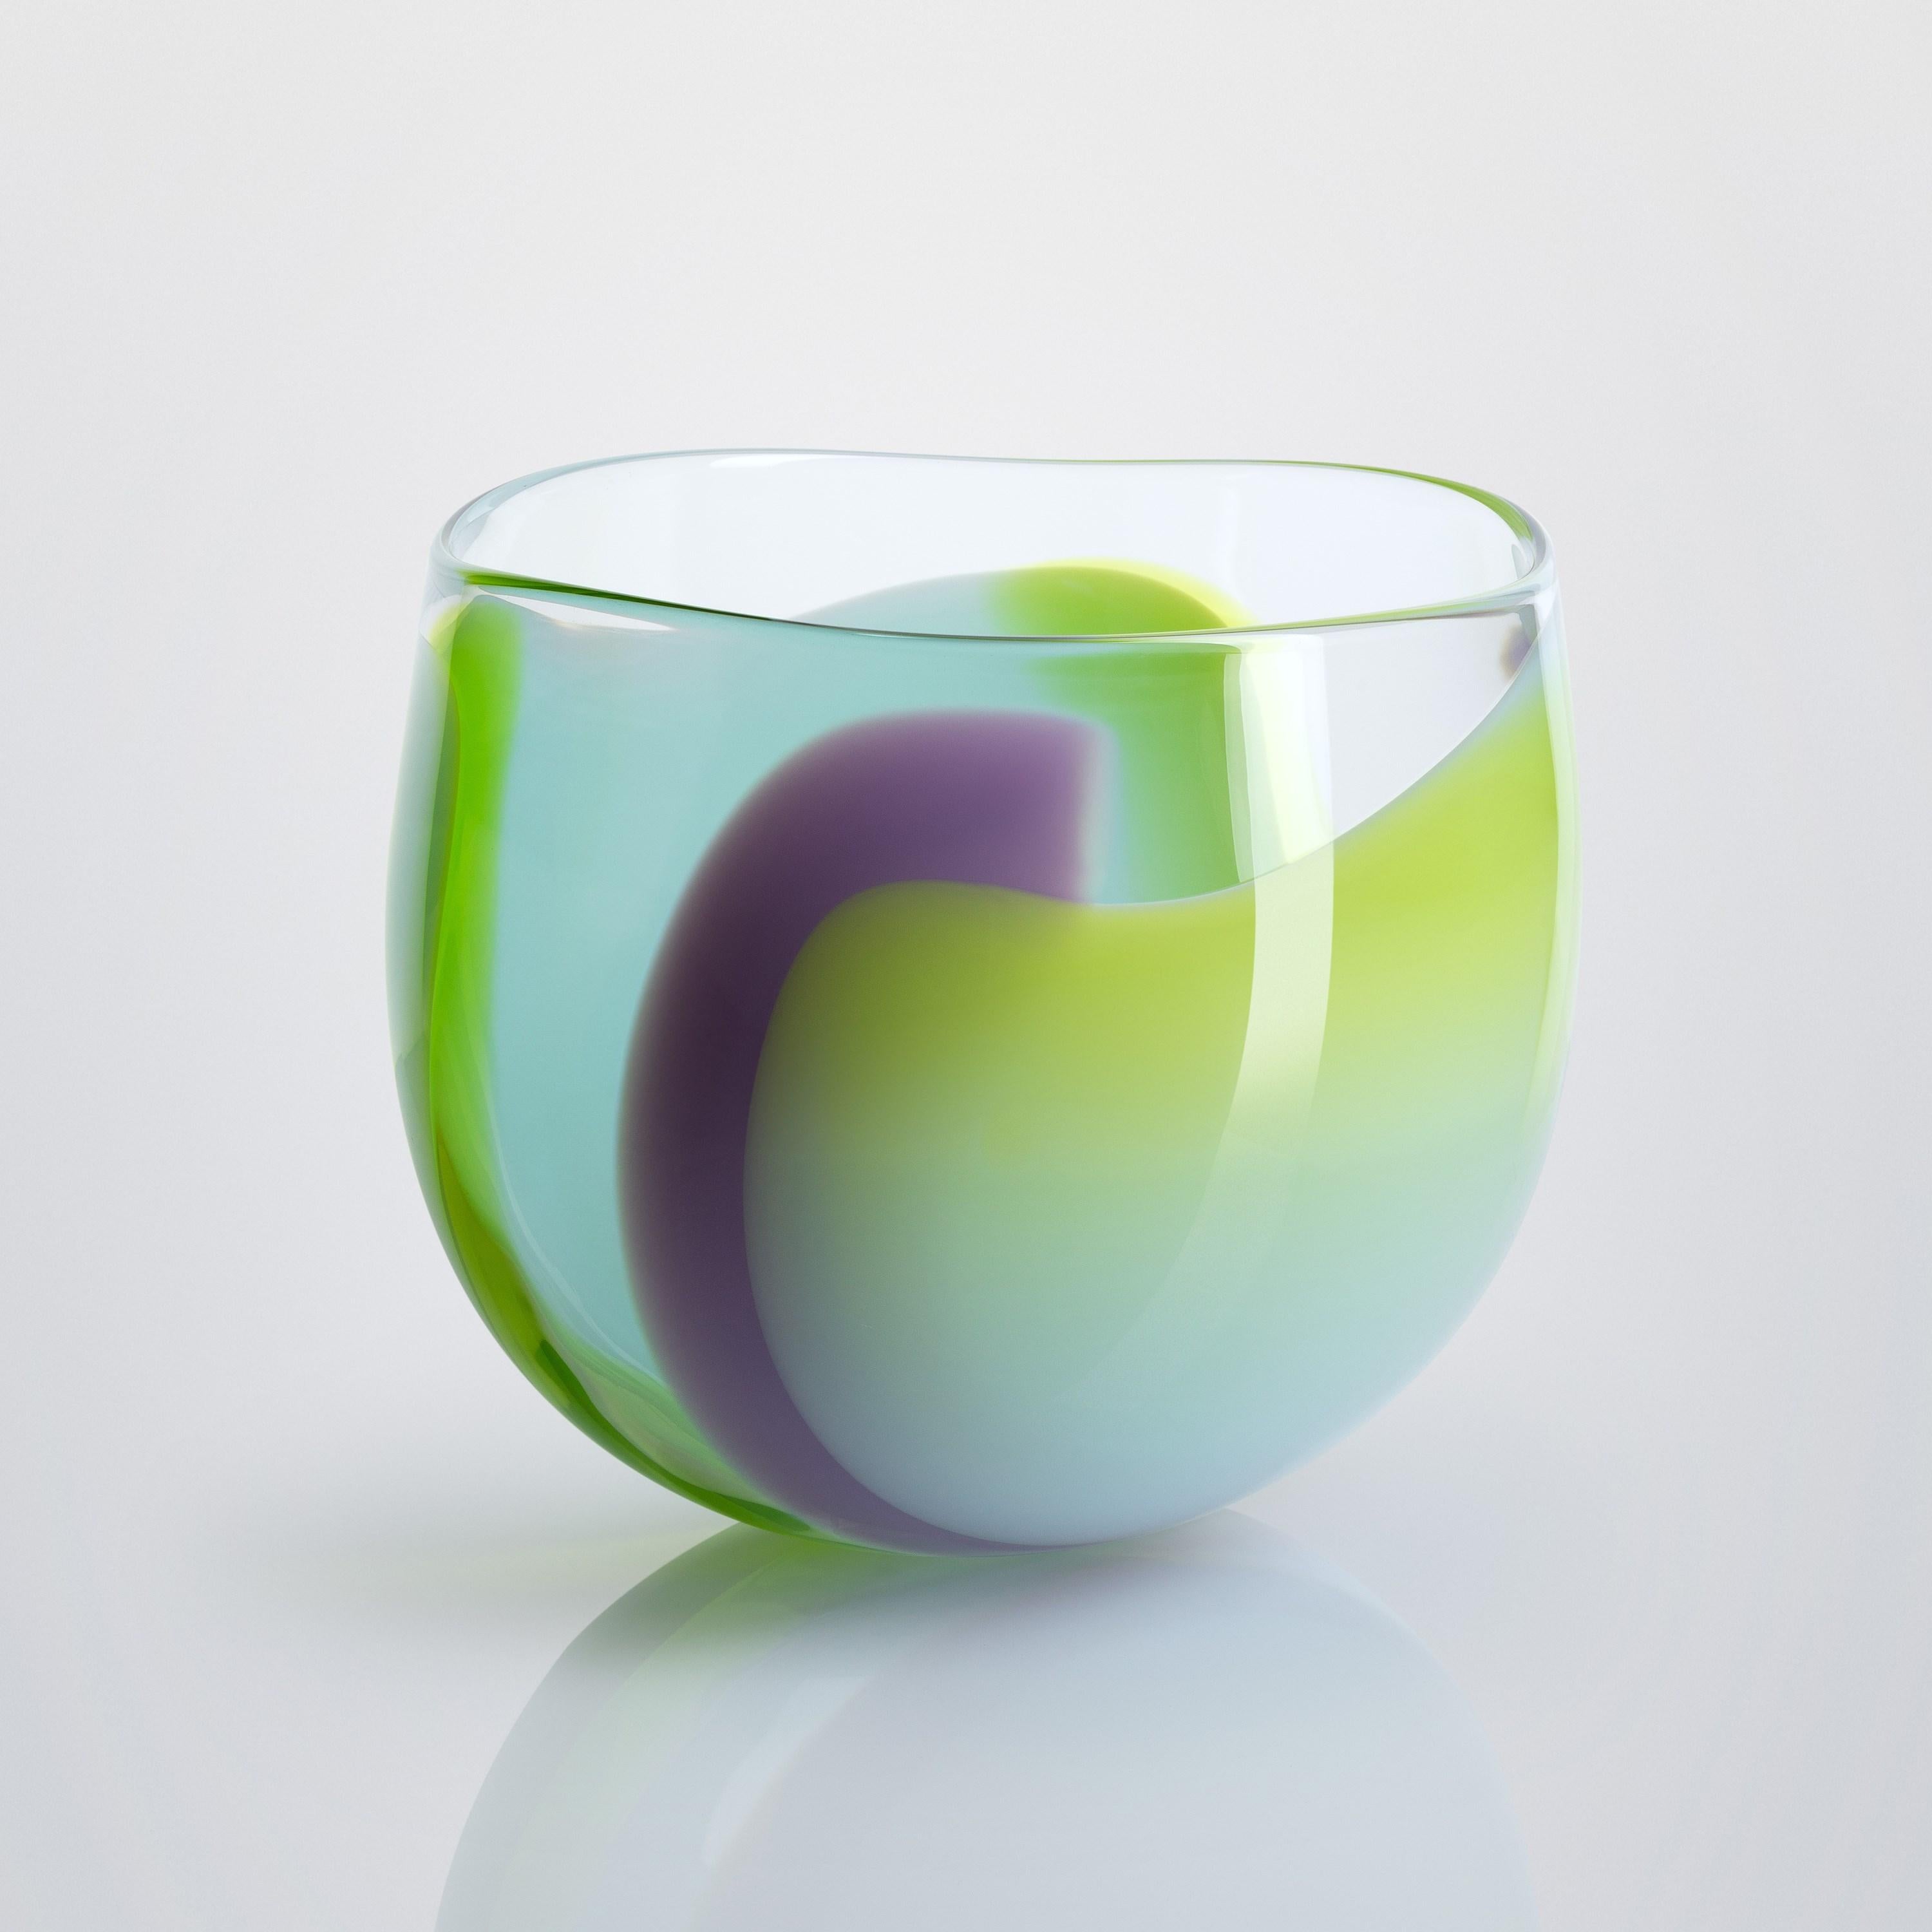 'Waves No 638' is a handblown glass bowl by the British artist, Neil Wilkin.

'Waves' is a collection of beautifully crafted, unique glass bowls and centrepieces by the British artist Neil Wilkin. Taking a painterly approach, Neil Wilkin merges his